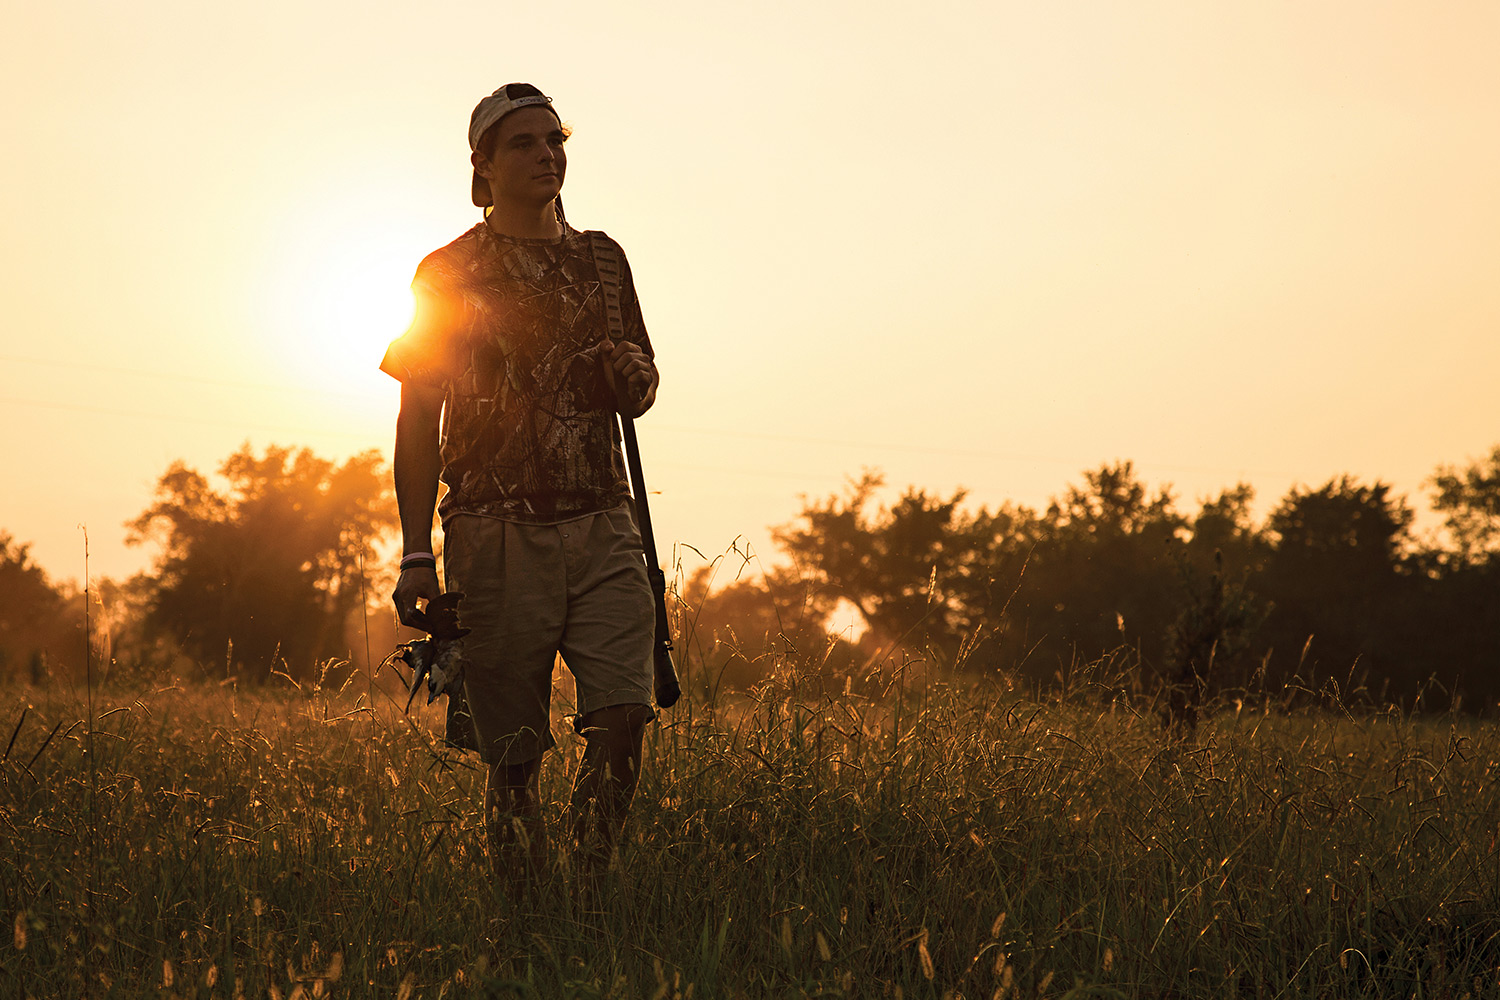 young hunter carrying dove and gun walks through field and sun sets over his shoulder